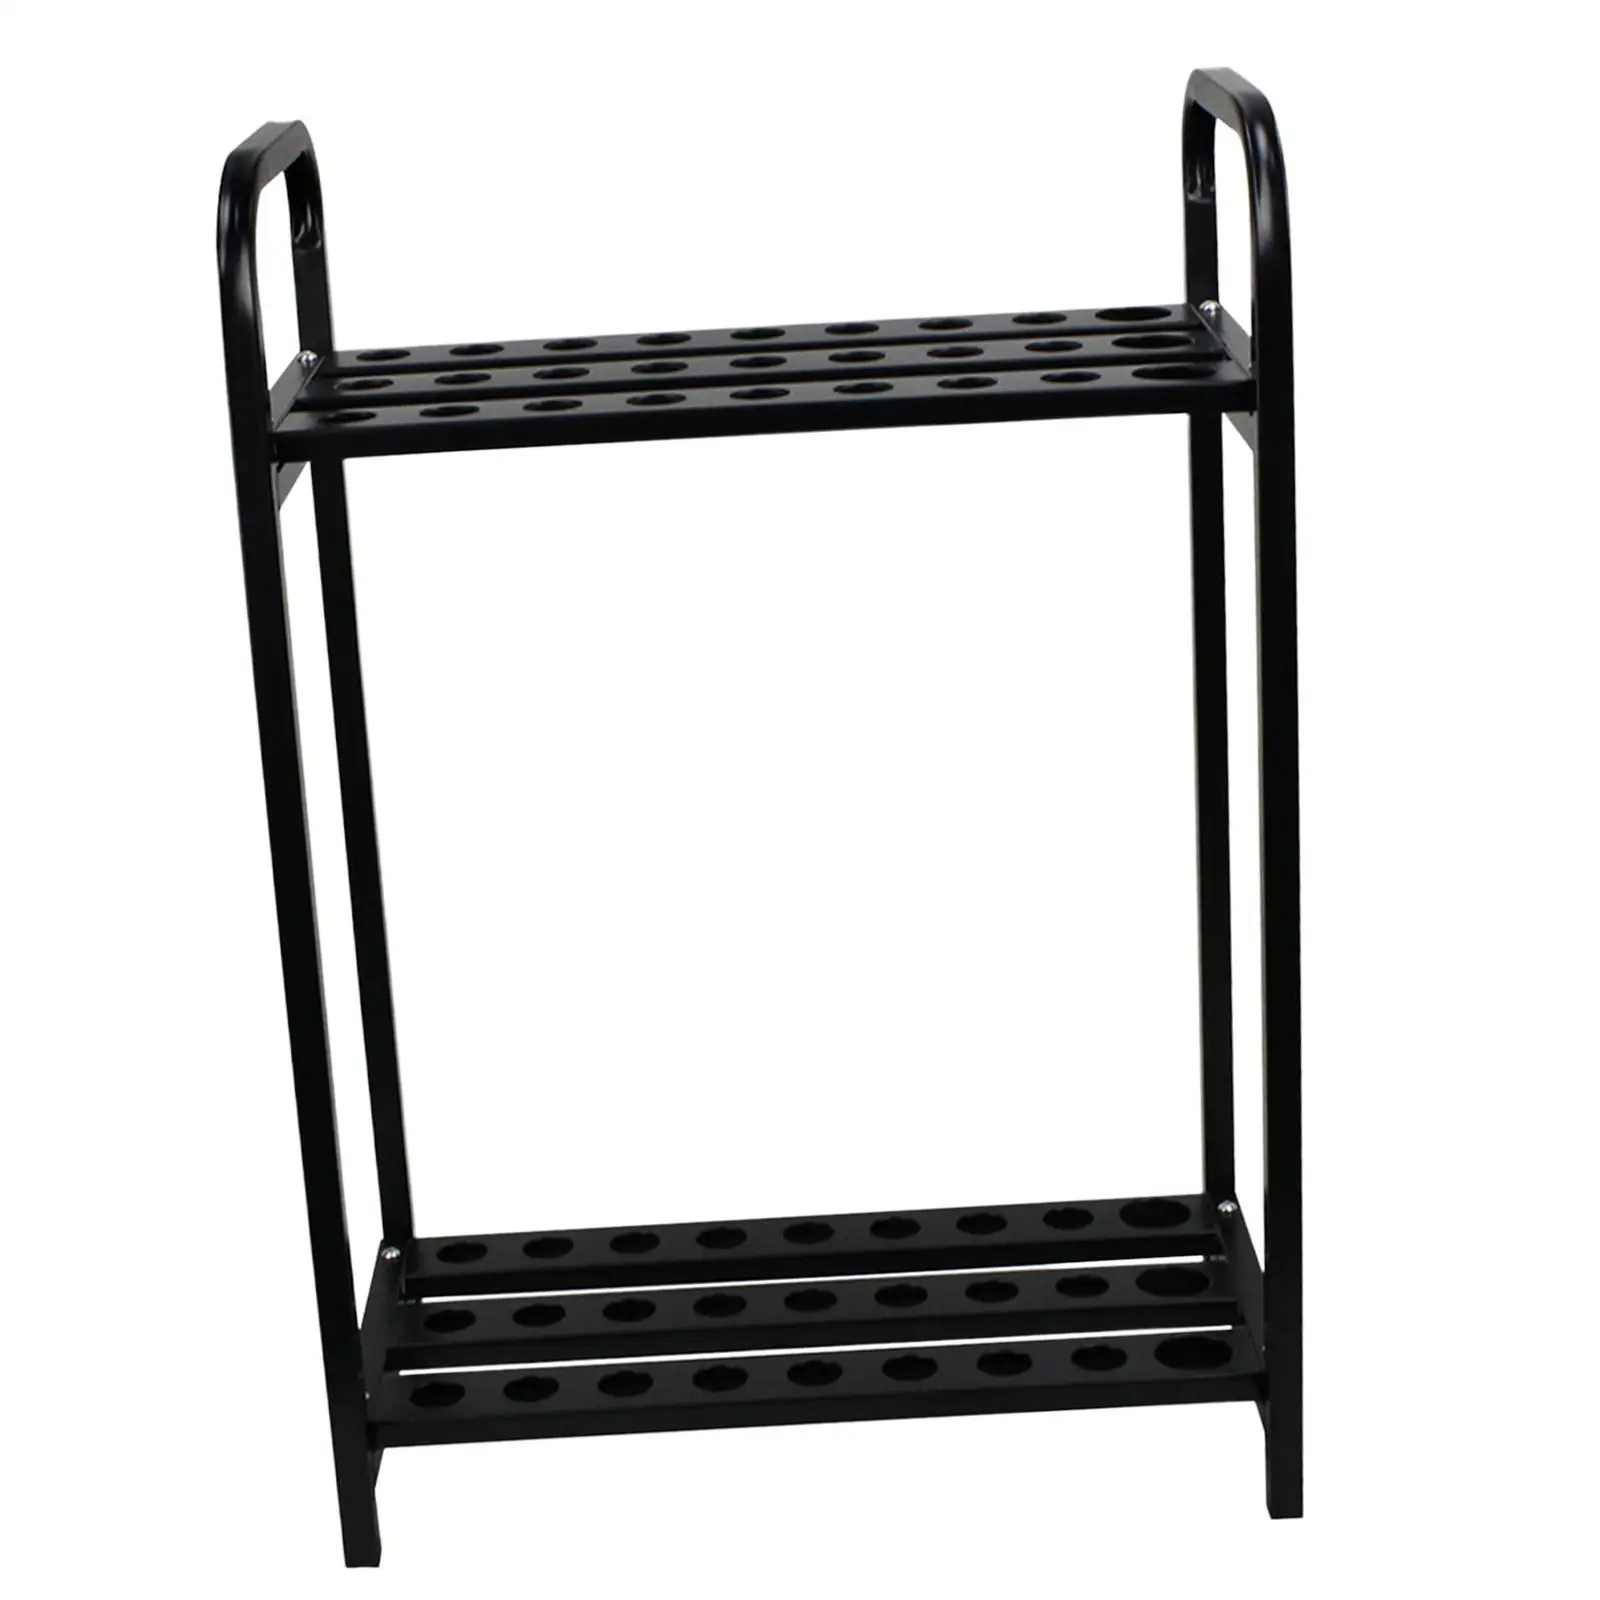 Portable Golf Club Holder Stand, 27 Holes Accessories, Floor Stand, Golf Club Rack, for Basement Indoor Storage Display